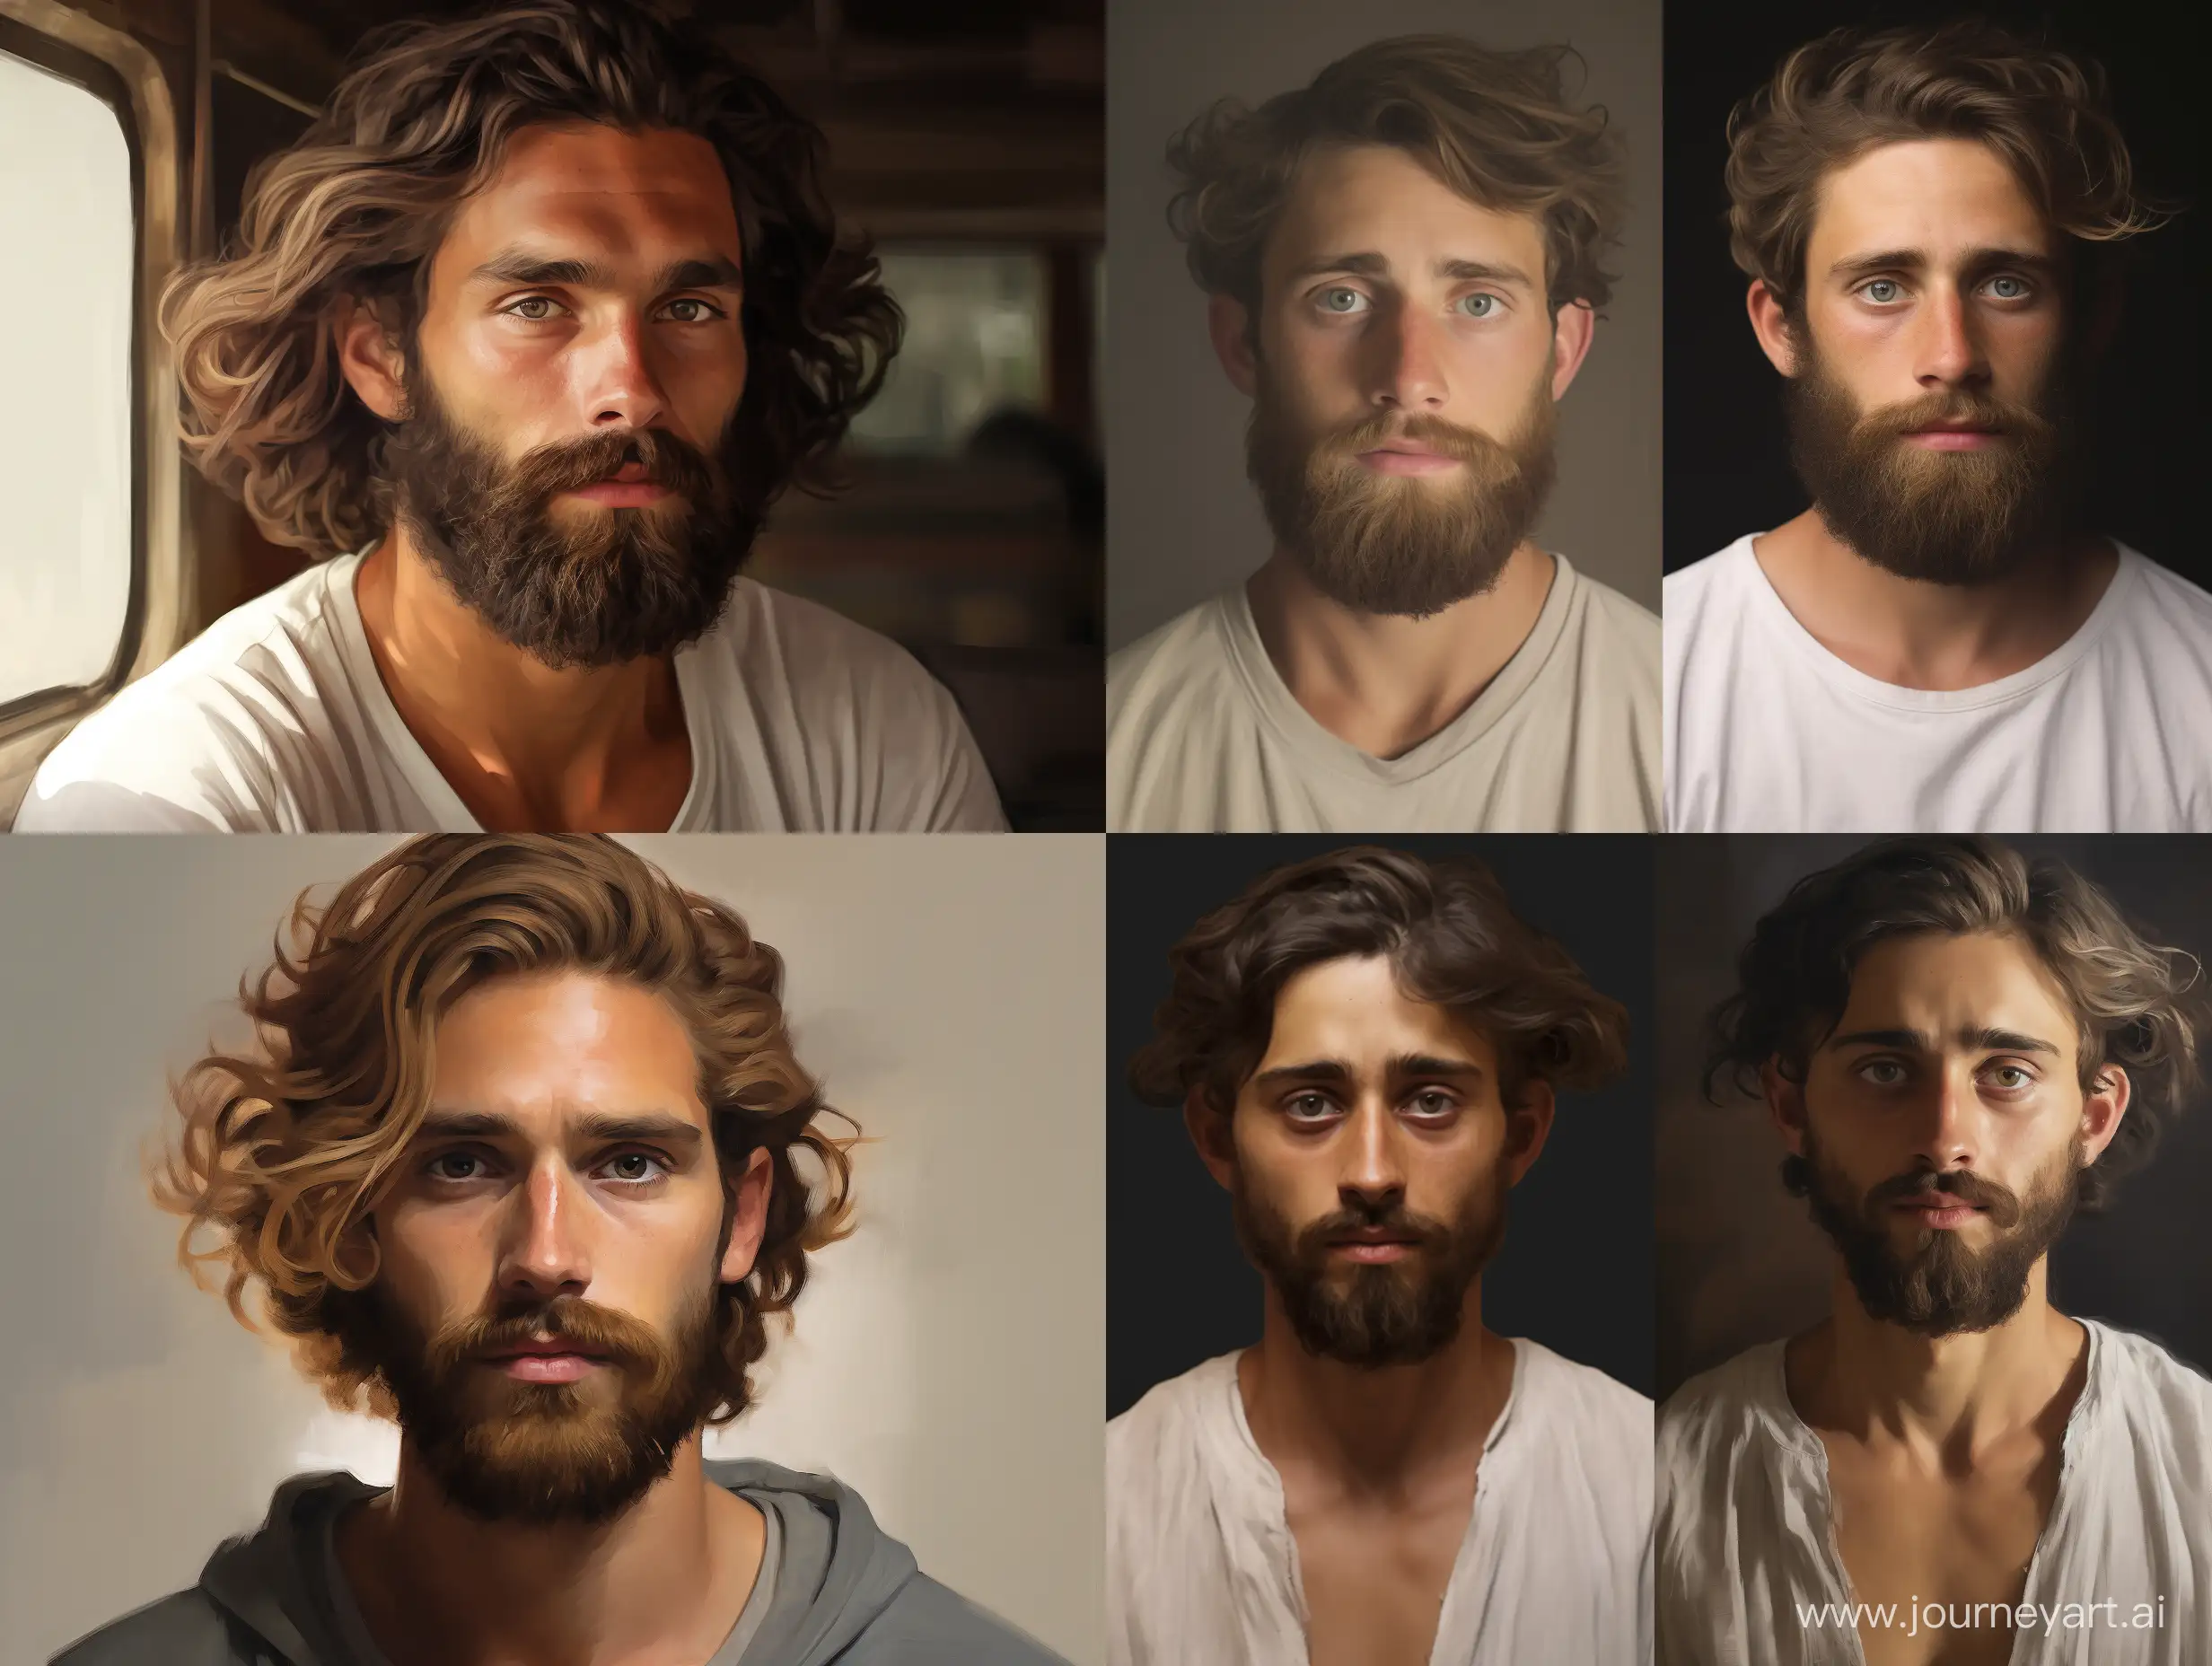 Bearded-24YearOld-White-Man-with-Tan-Complexion-in-Thoughtful-Pose